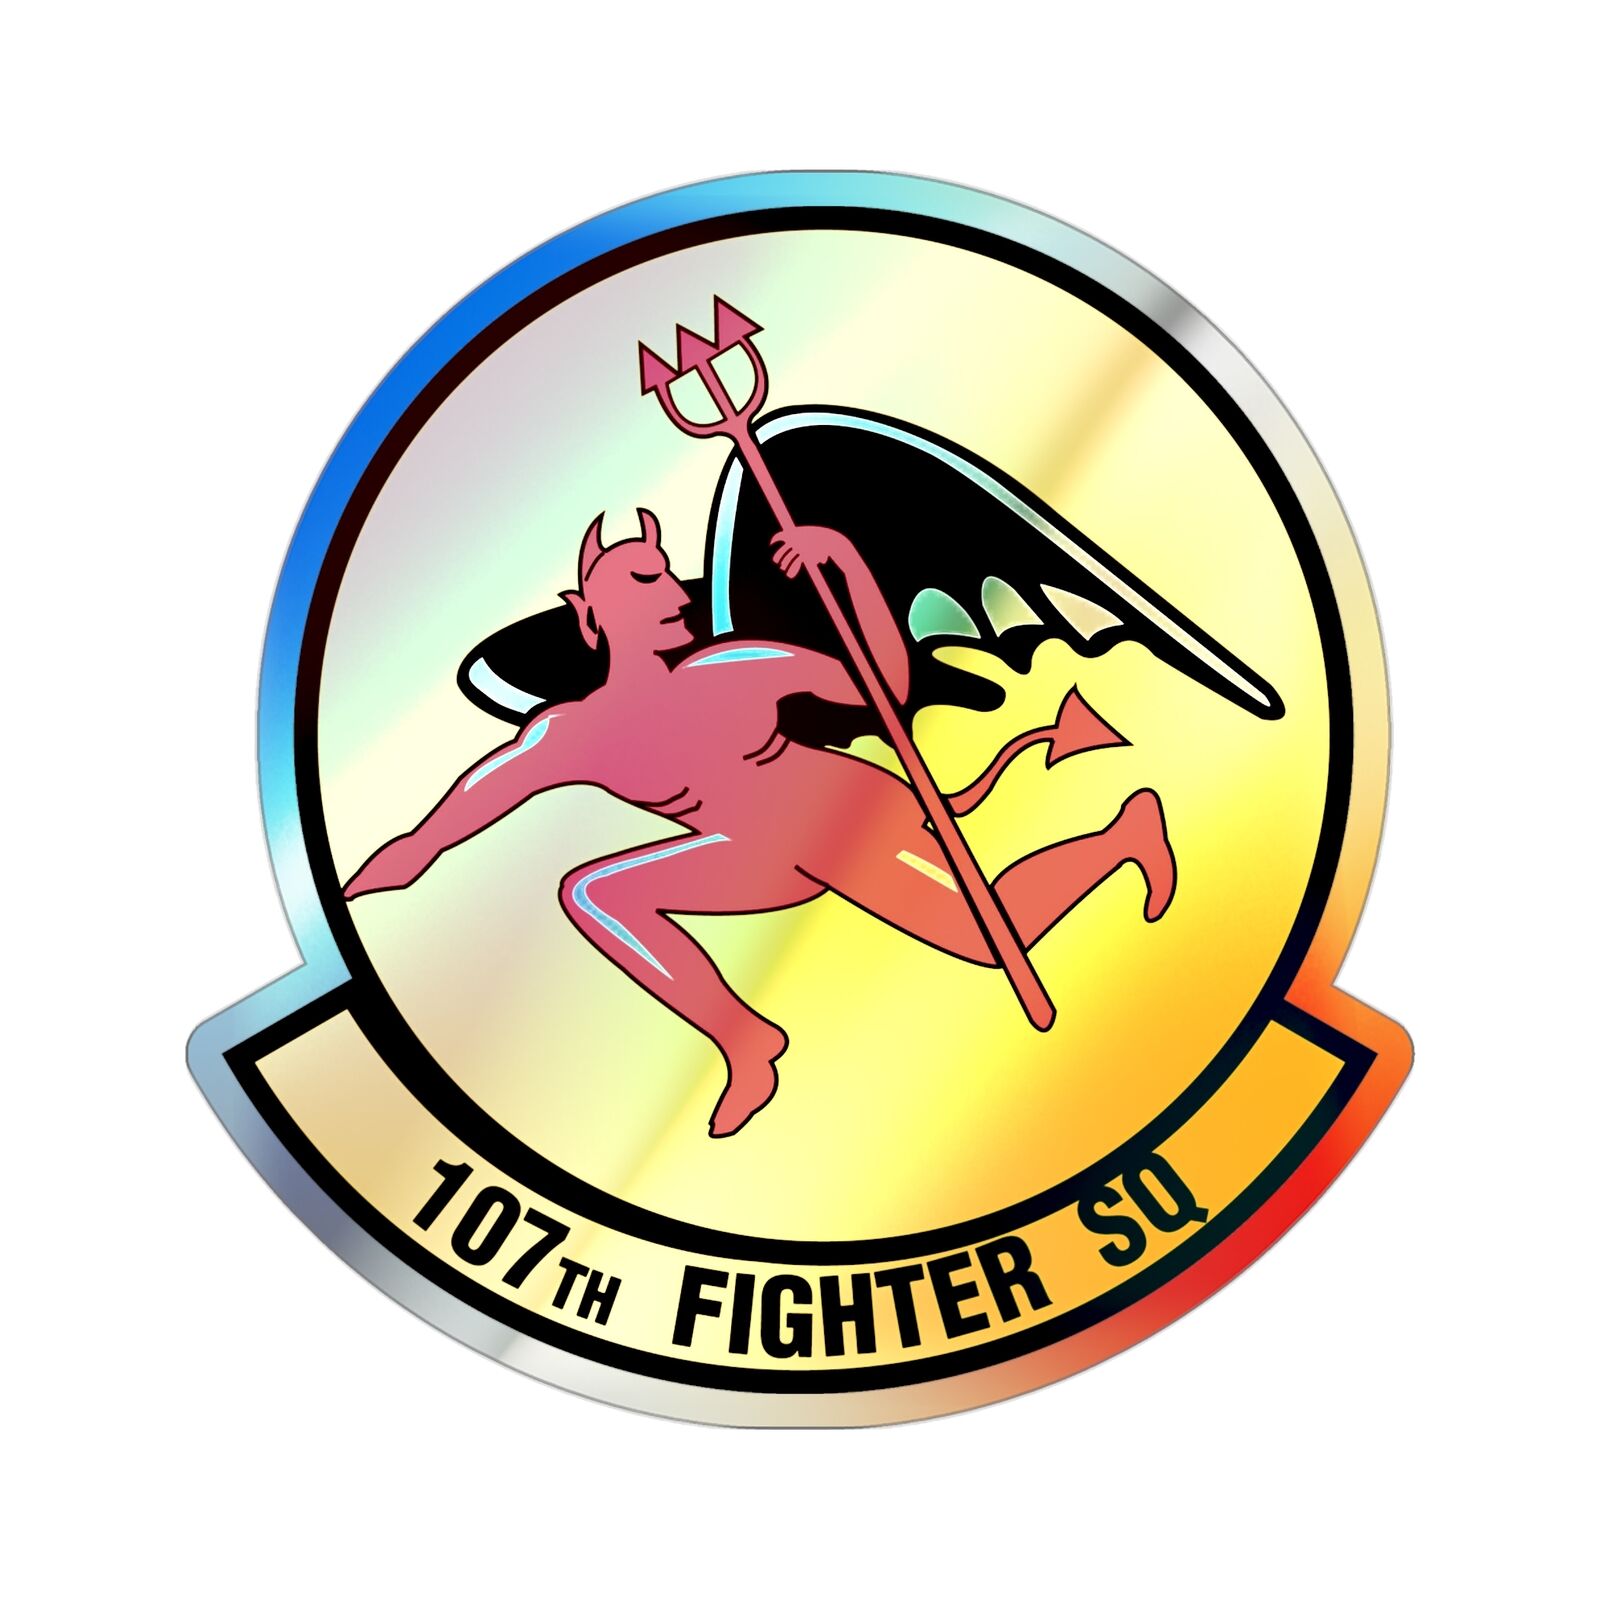 107th Fighter Squadron (U.S. Air Force) Holographic STICKER Die-Cut Vinyl Decal